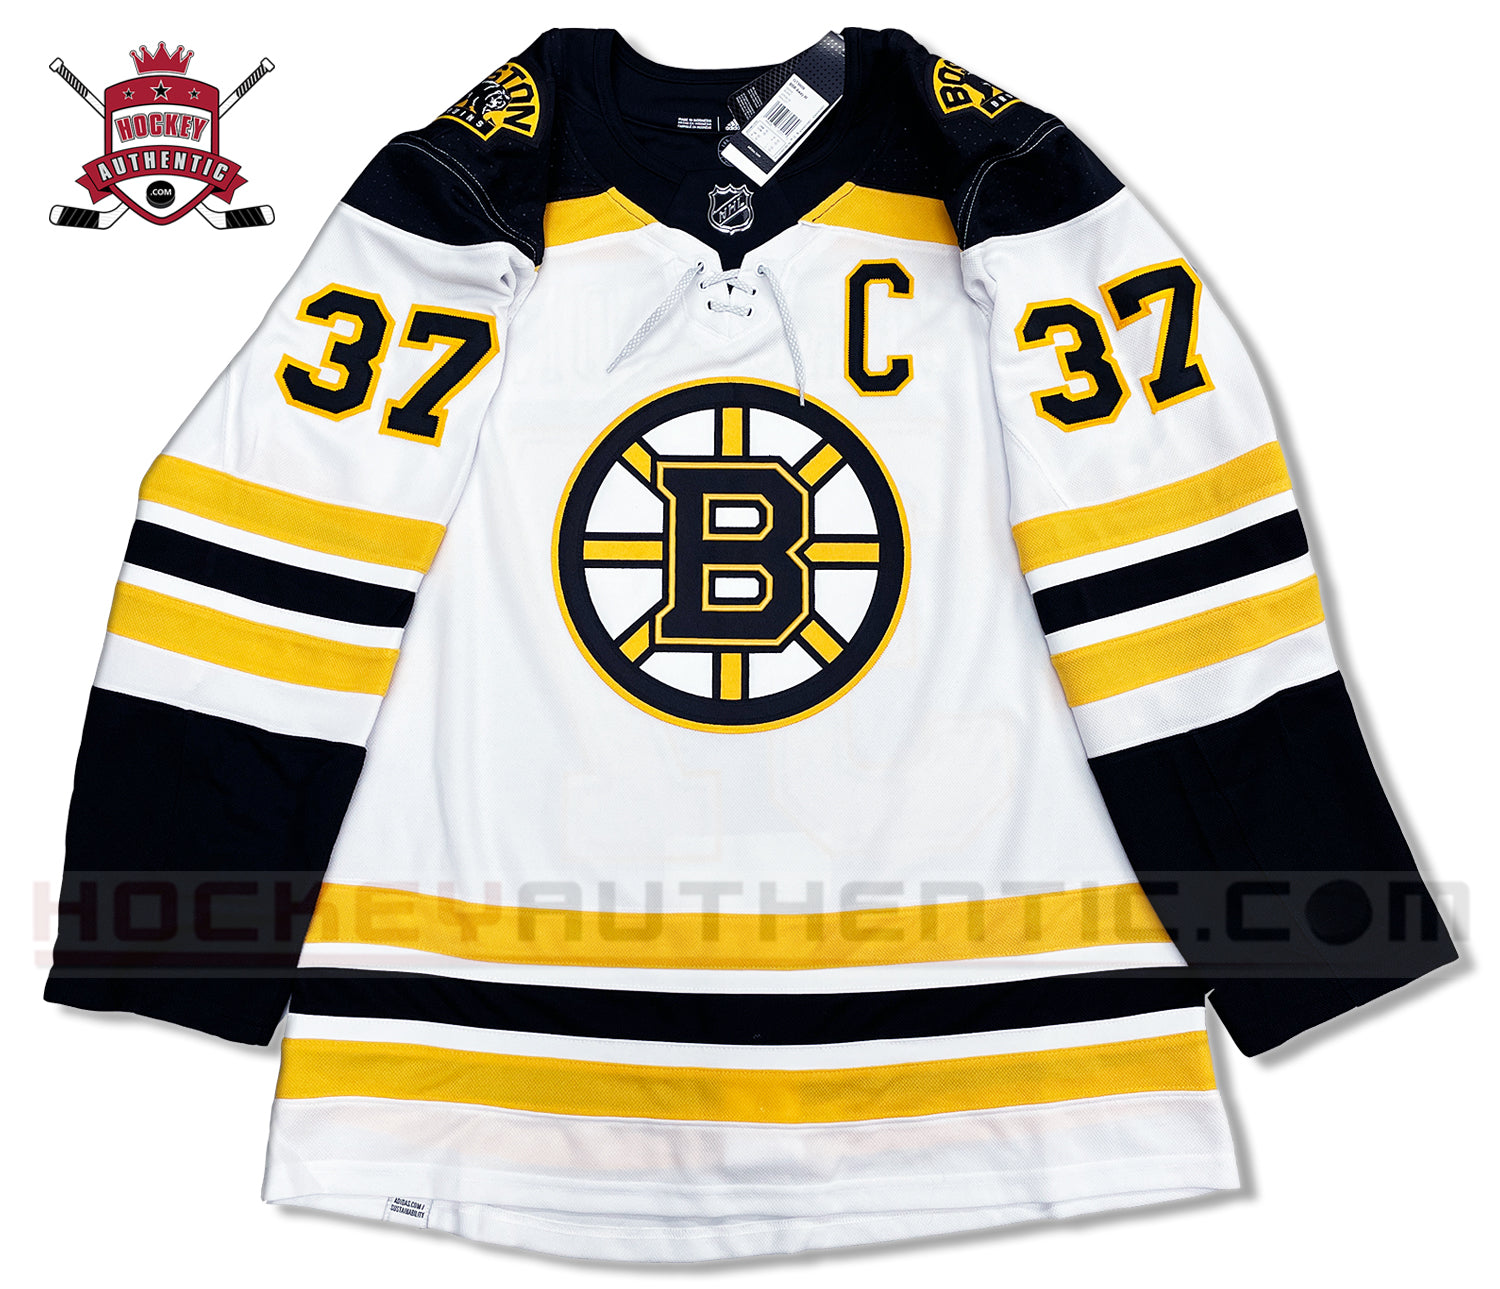 Adidas Boston Bruins Authentic NHL Jersey - Away - Adult